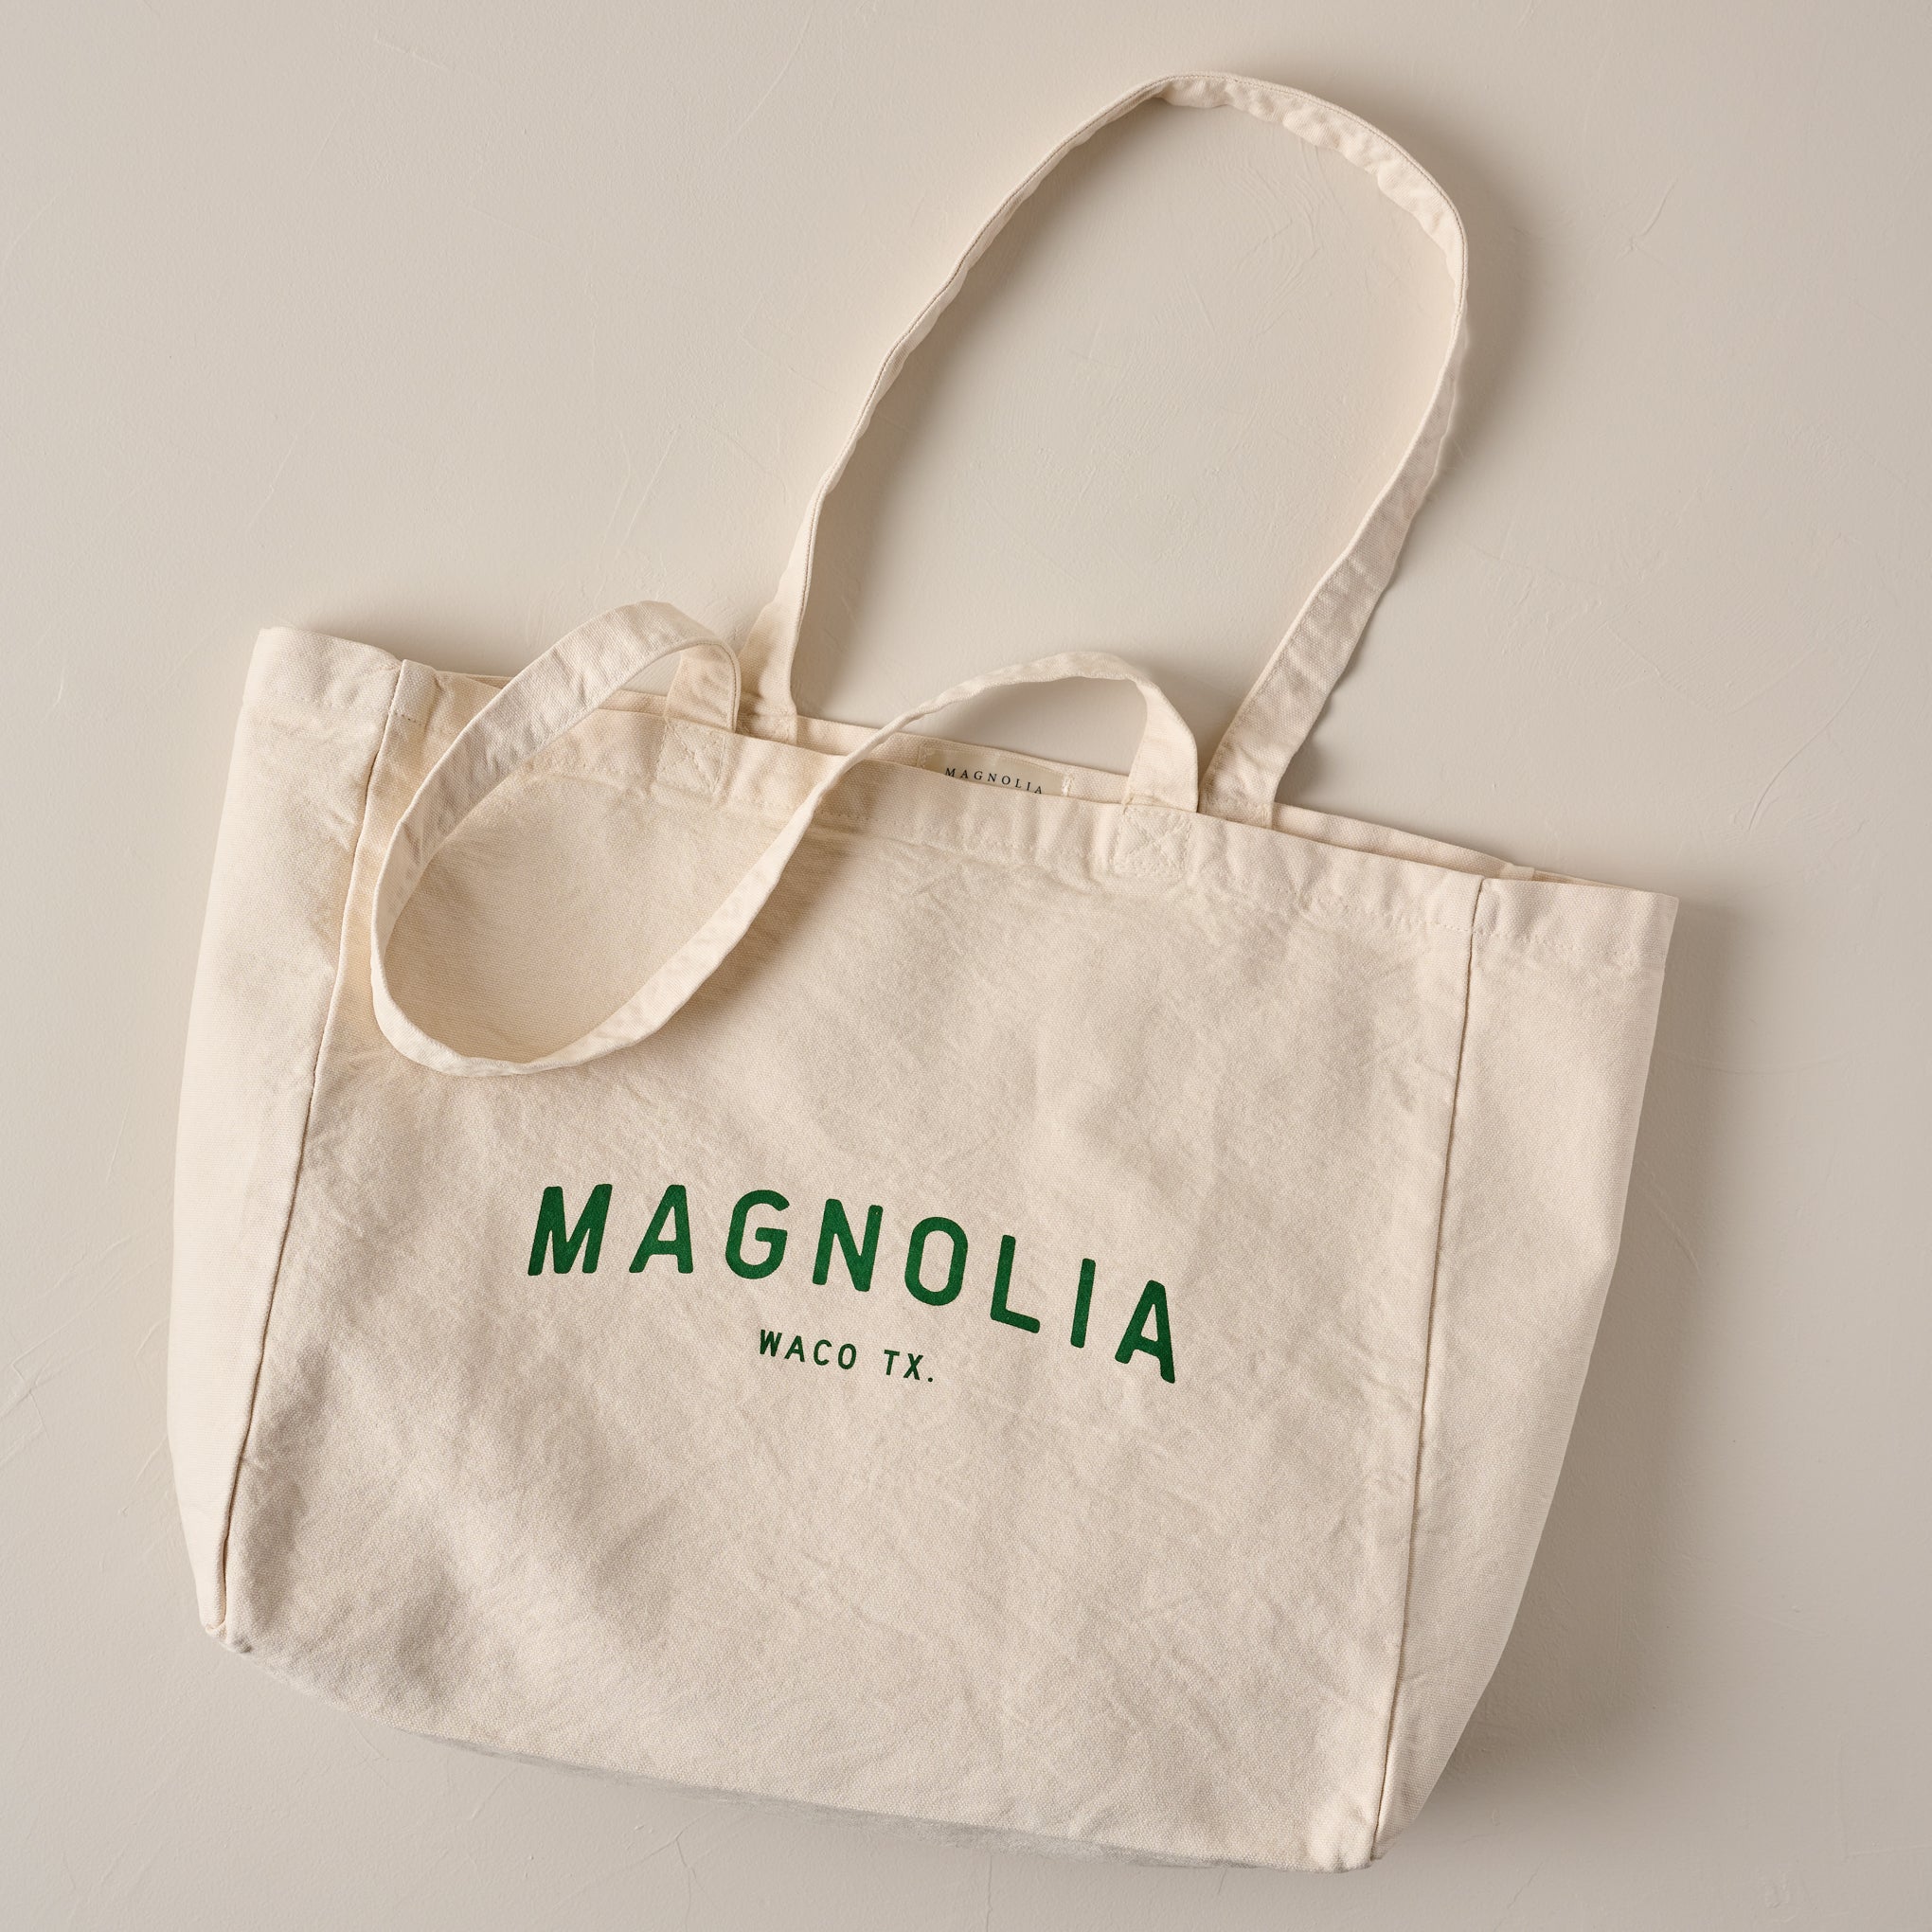 Magnolia Arched Natural Tote $30.00